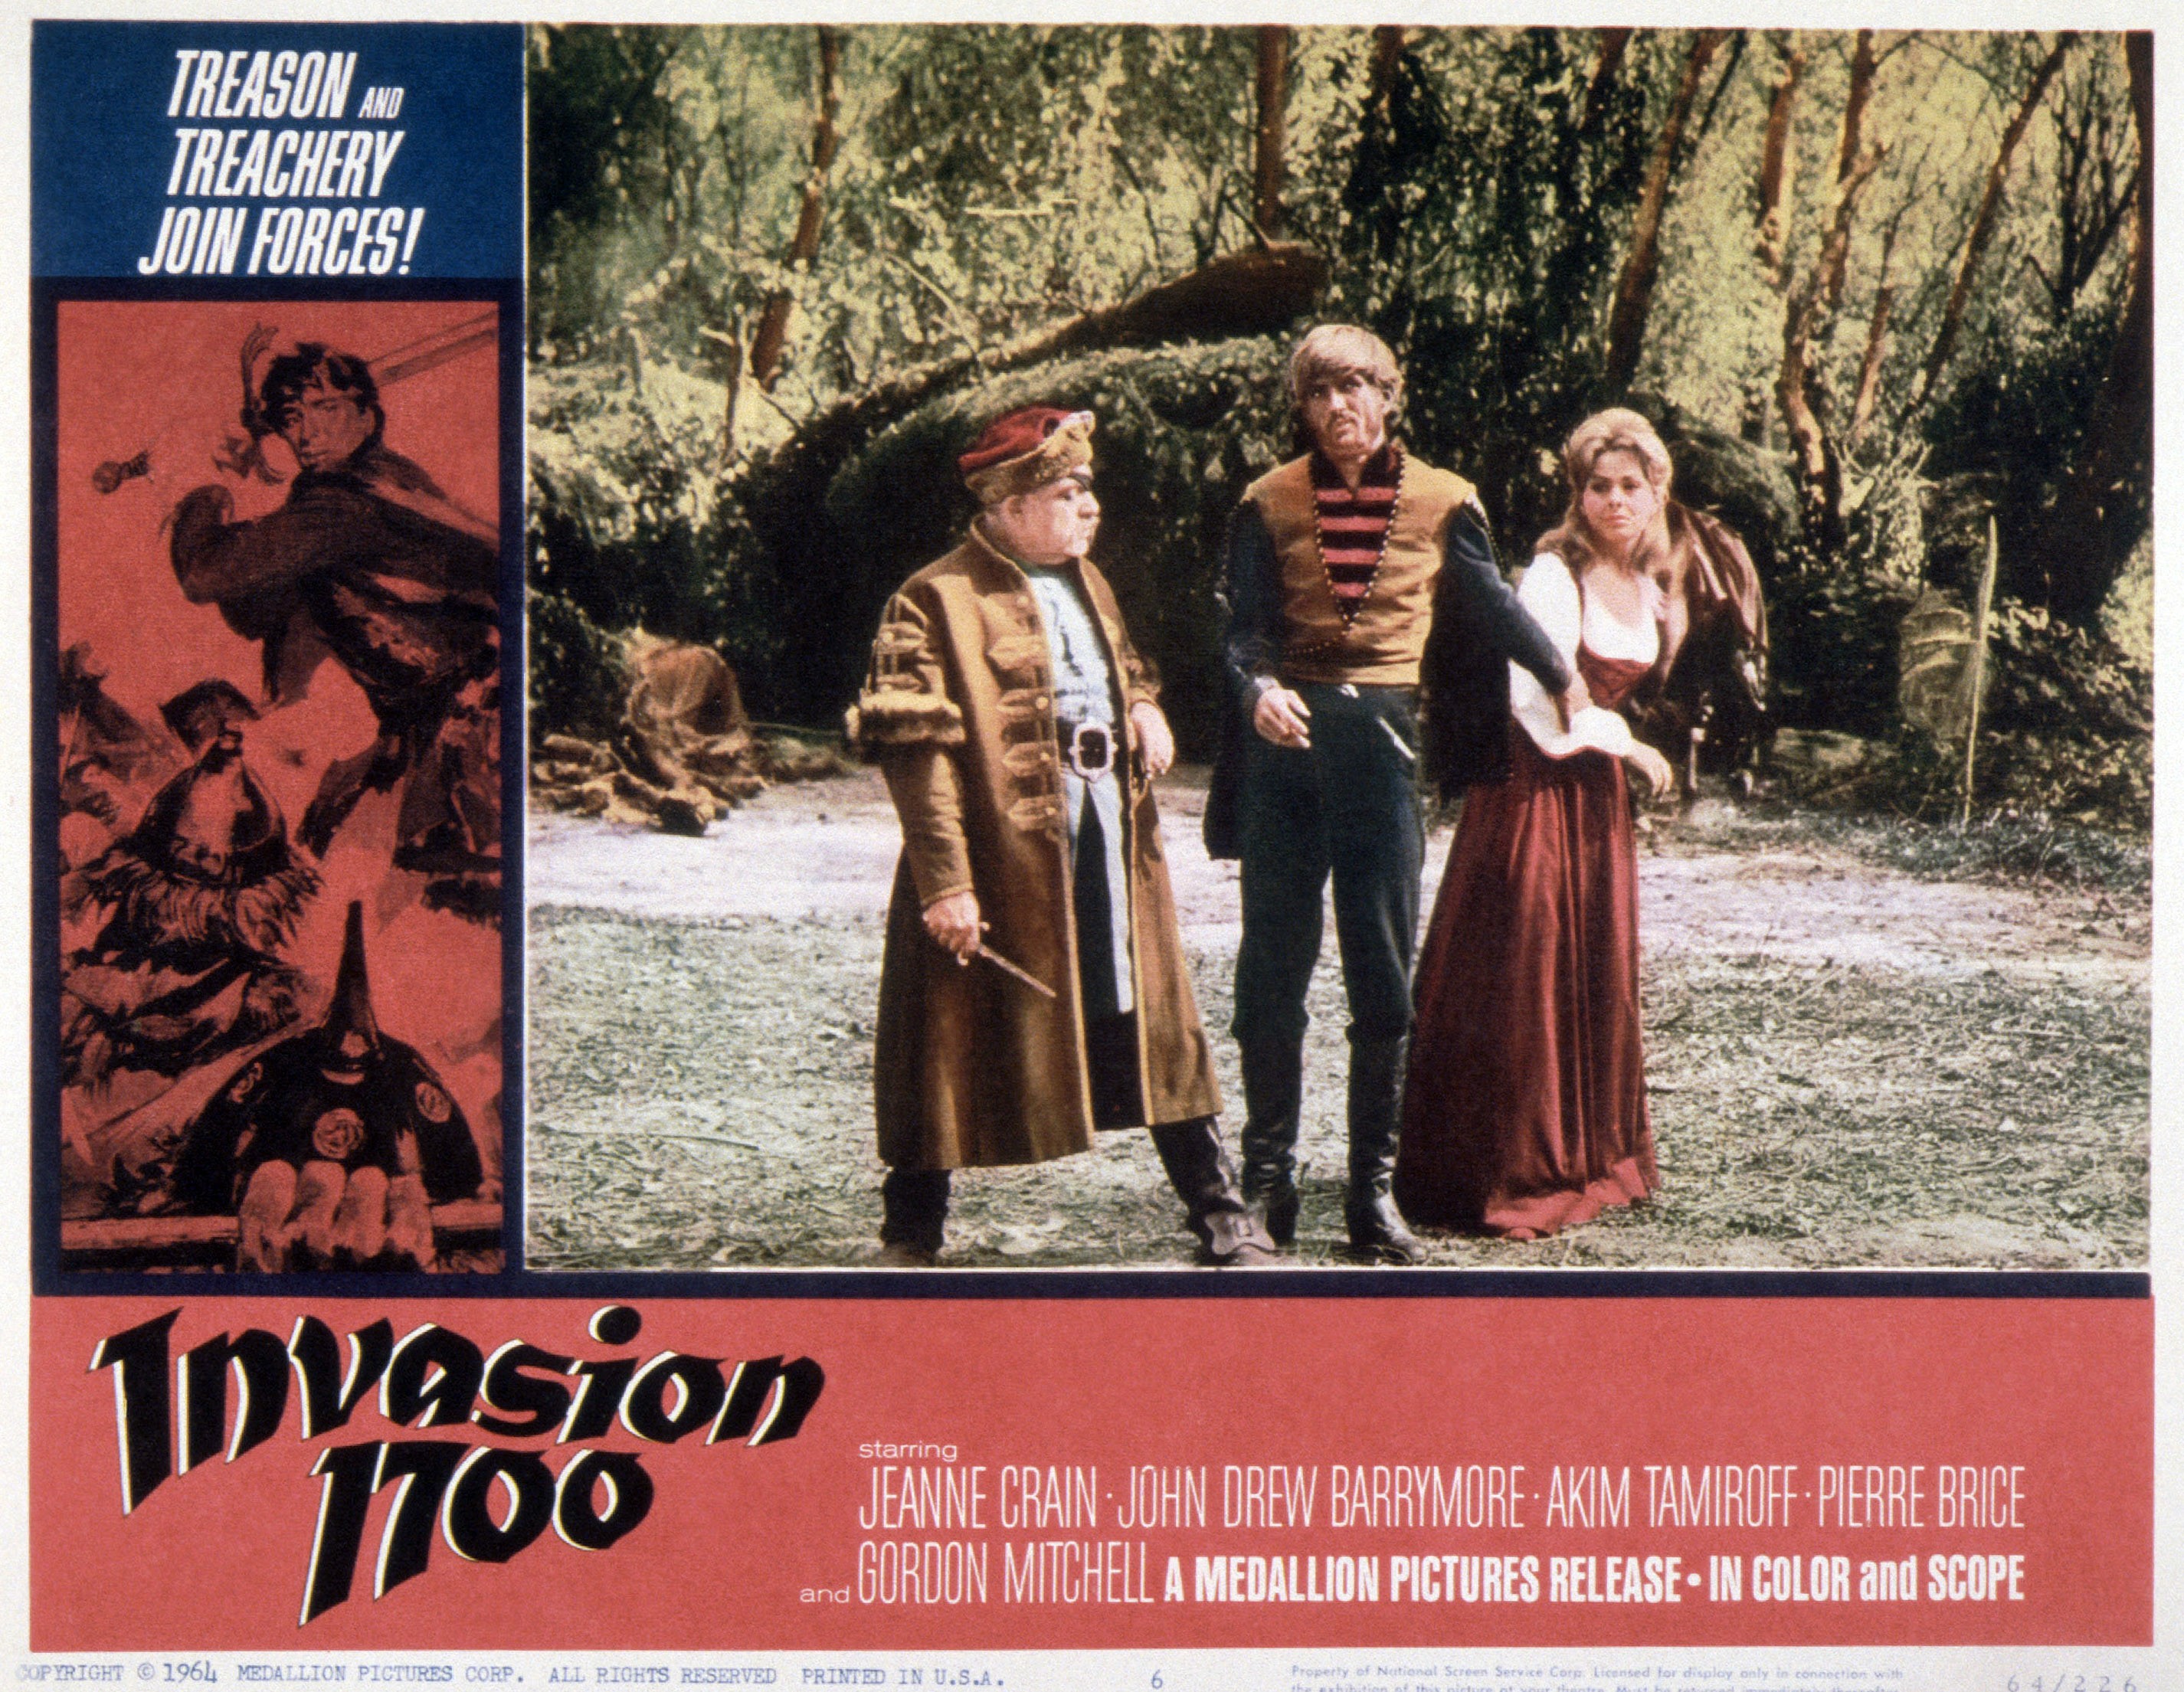 Akim Tamiroff, John Drew Barrymore, Jeanne Crain, on the 'Invasion 1700 poster in 1962. | Source: Getty Images